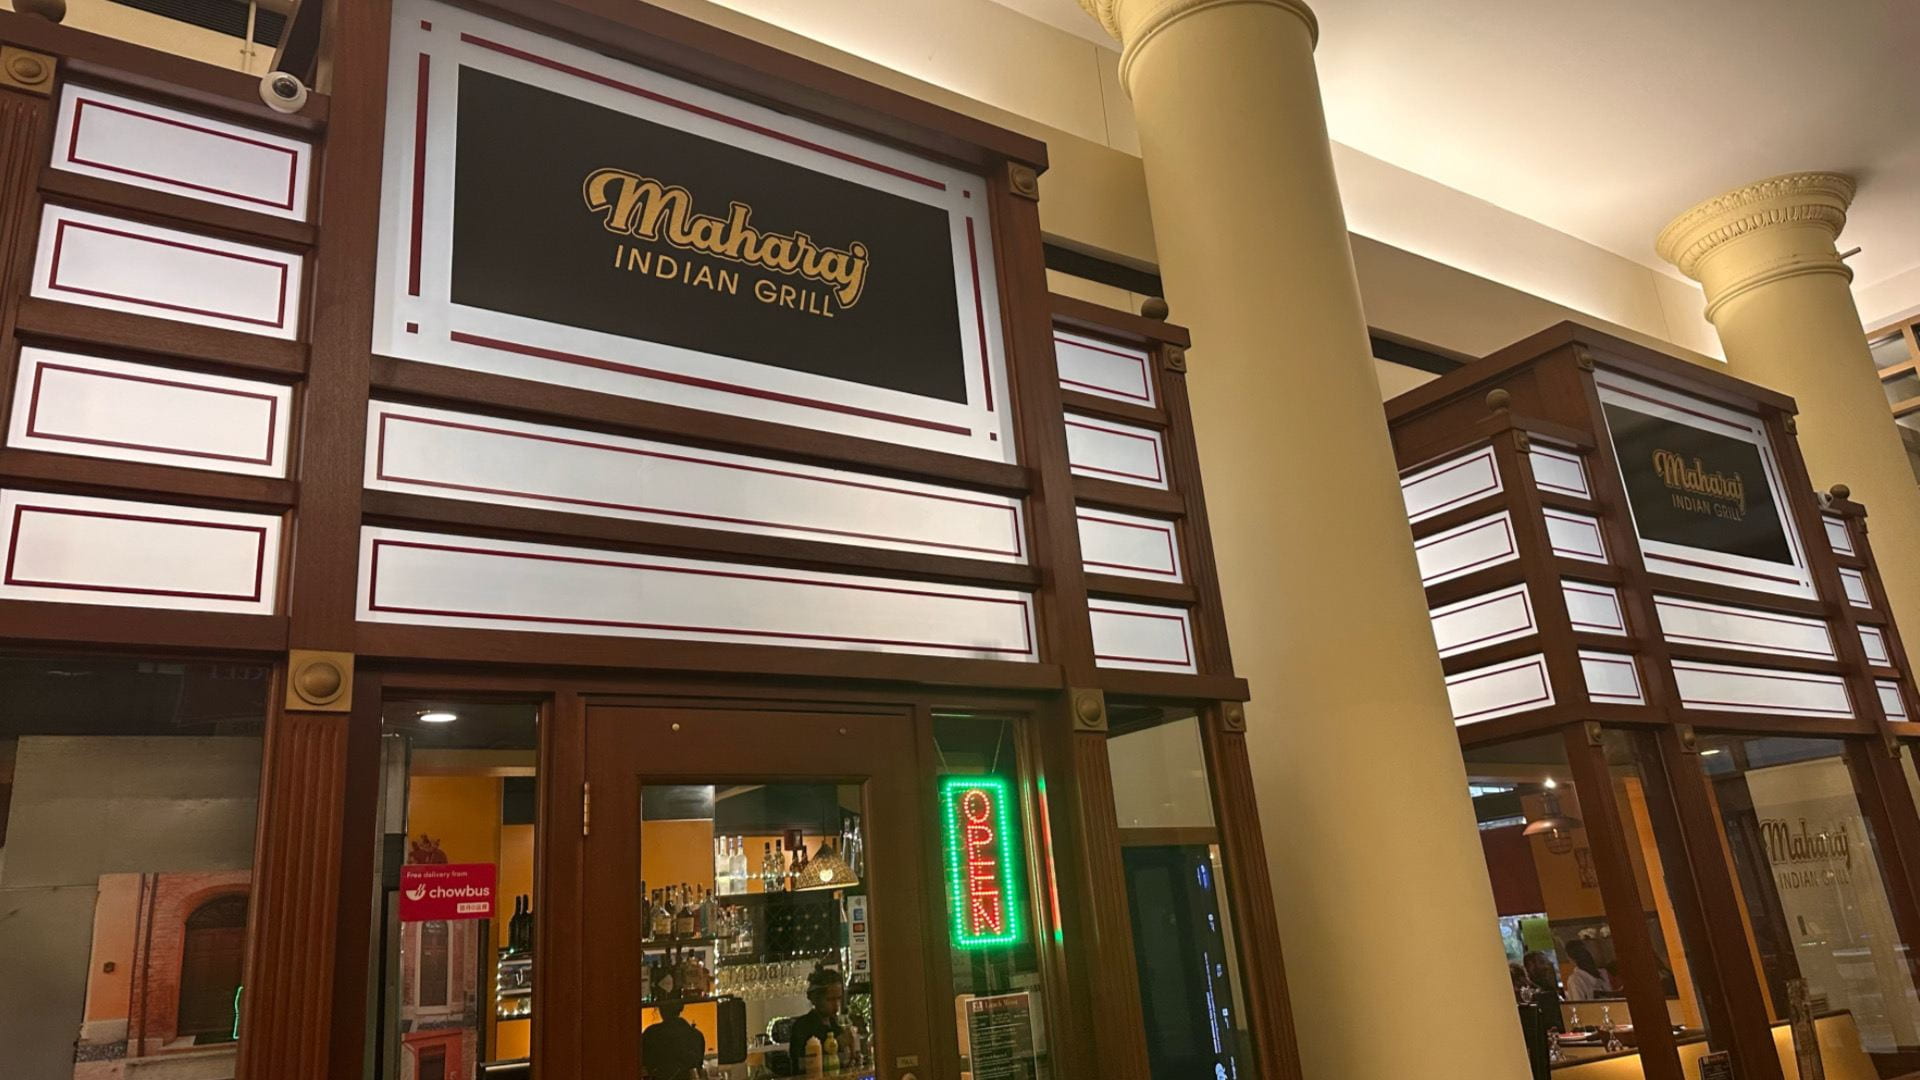 Image of a restaurant named “Maharaj Indian Grill”